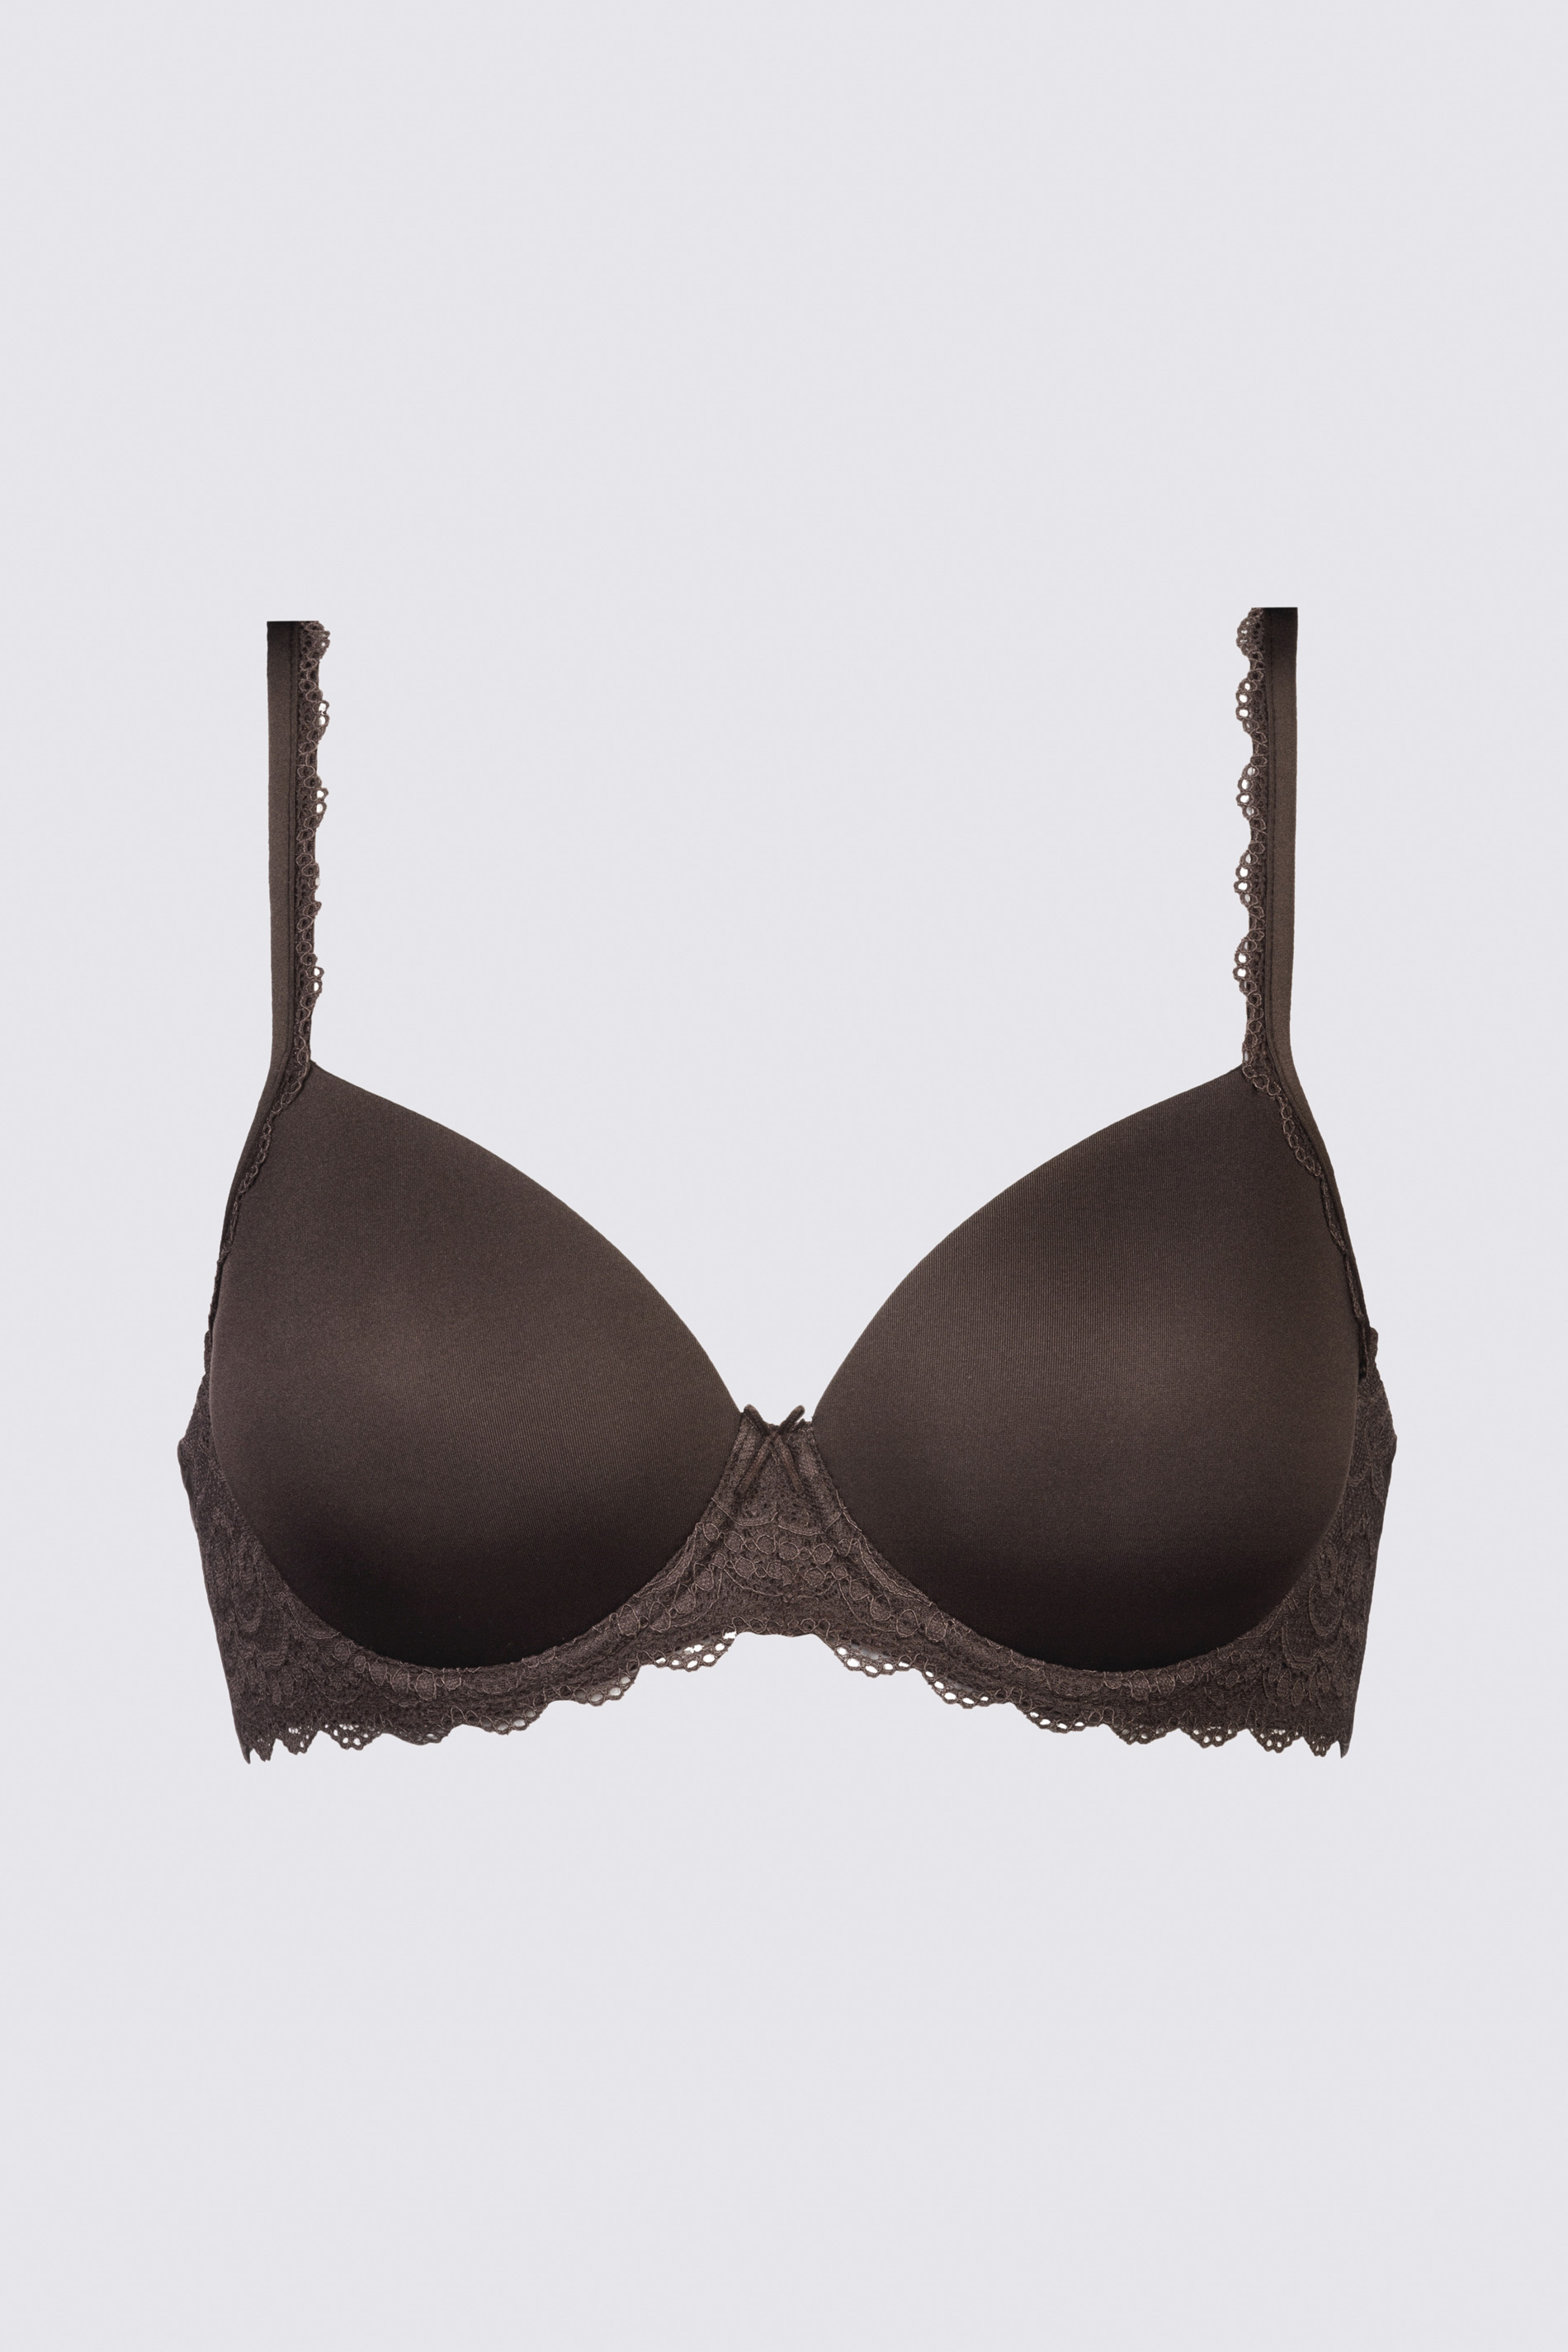 Cupbeha Liquorice Brown Serie Amorous Uitknippen | mey®